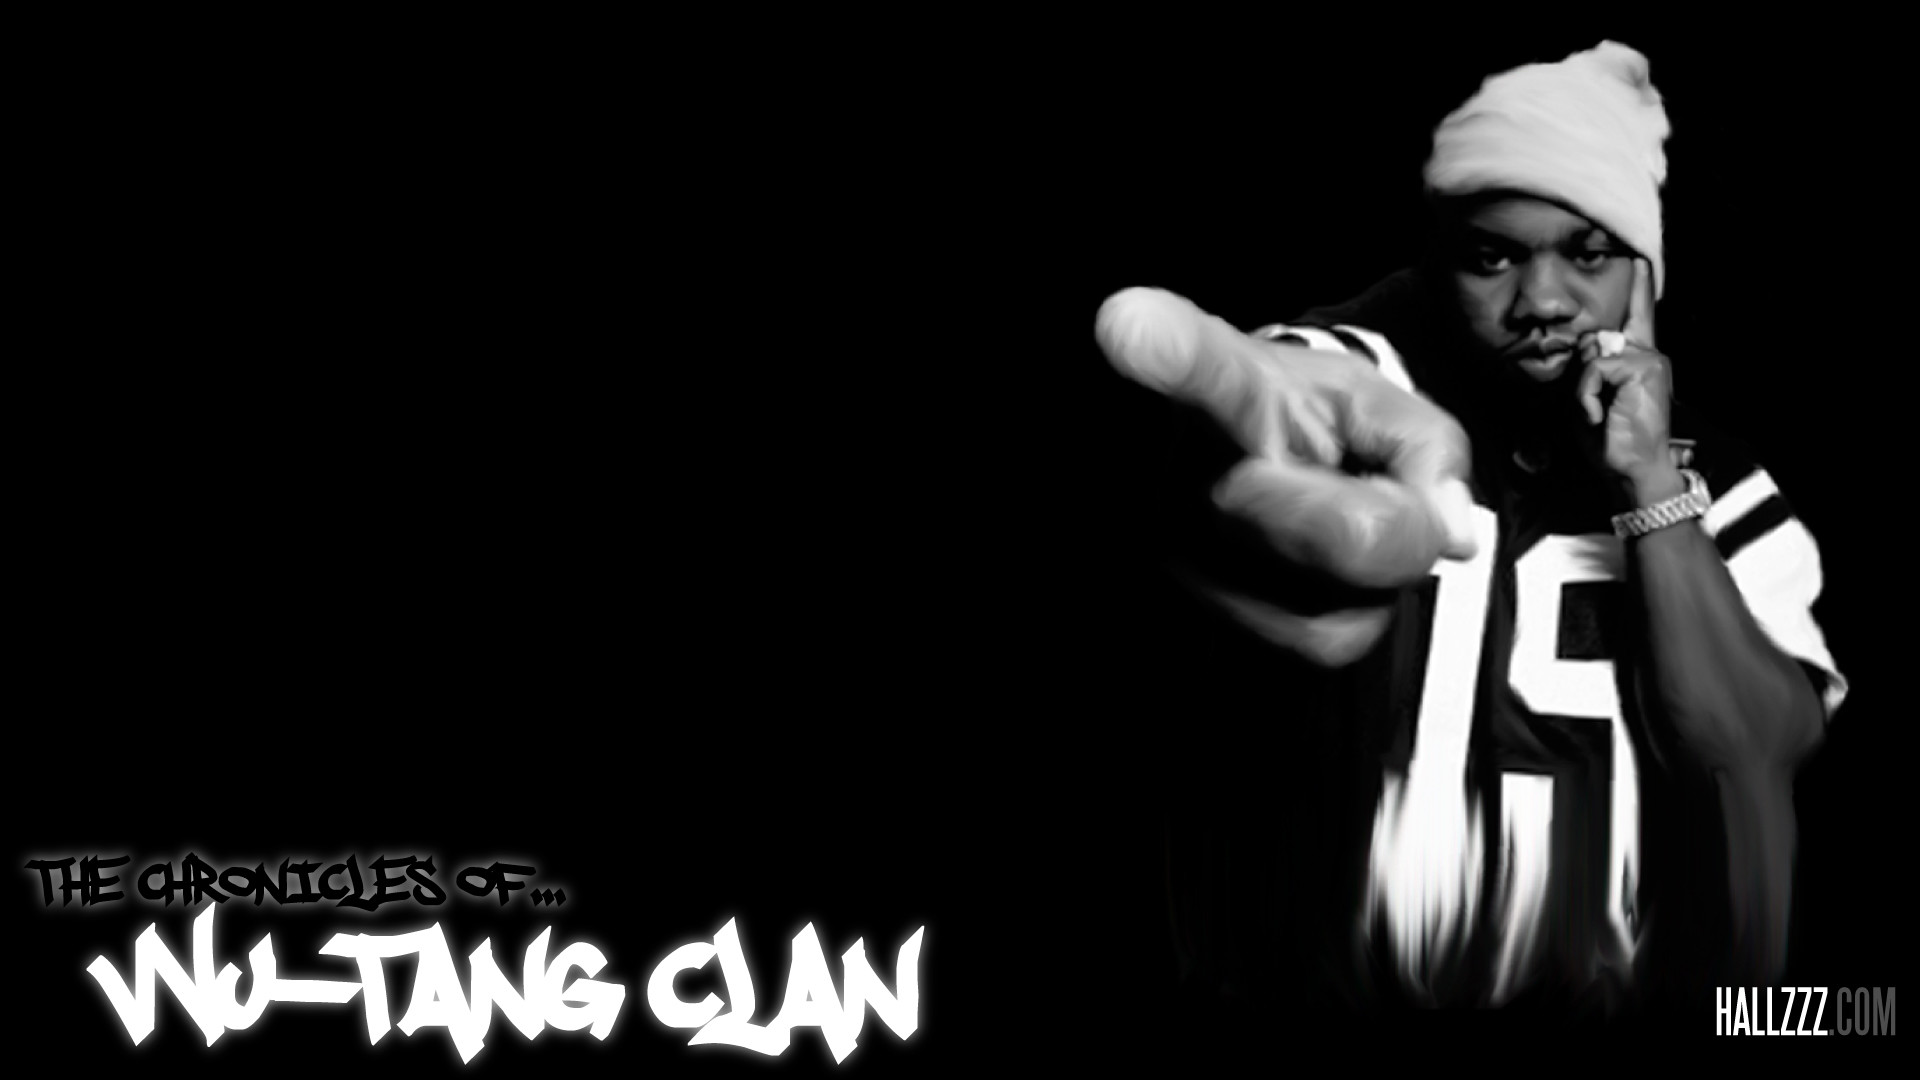 1920x1080 A cool background for you Wu tang fans Imgur 1024Ã768 Wu Tang Background (